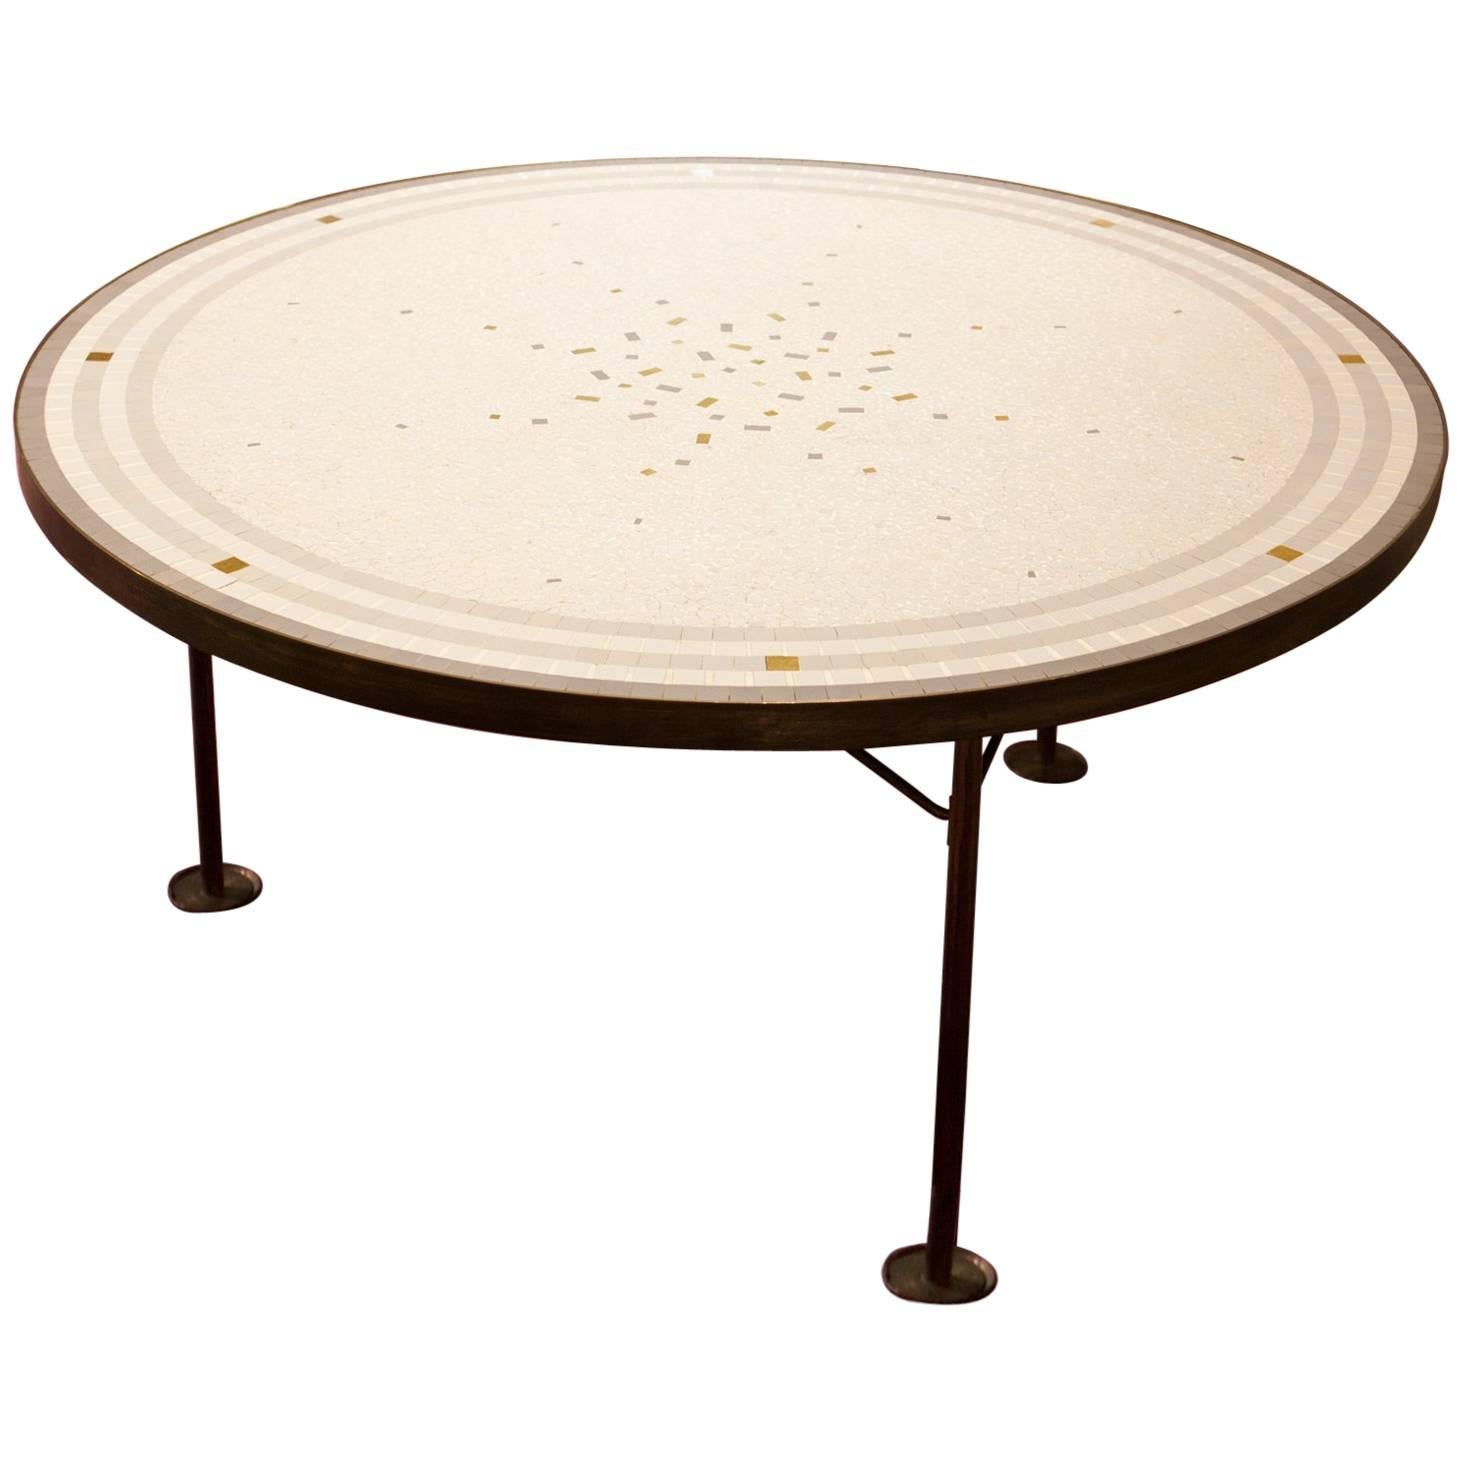 1950s Mid-Century Modern Italian Round Coffee Table in Brass with Mosaic Top For Sale